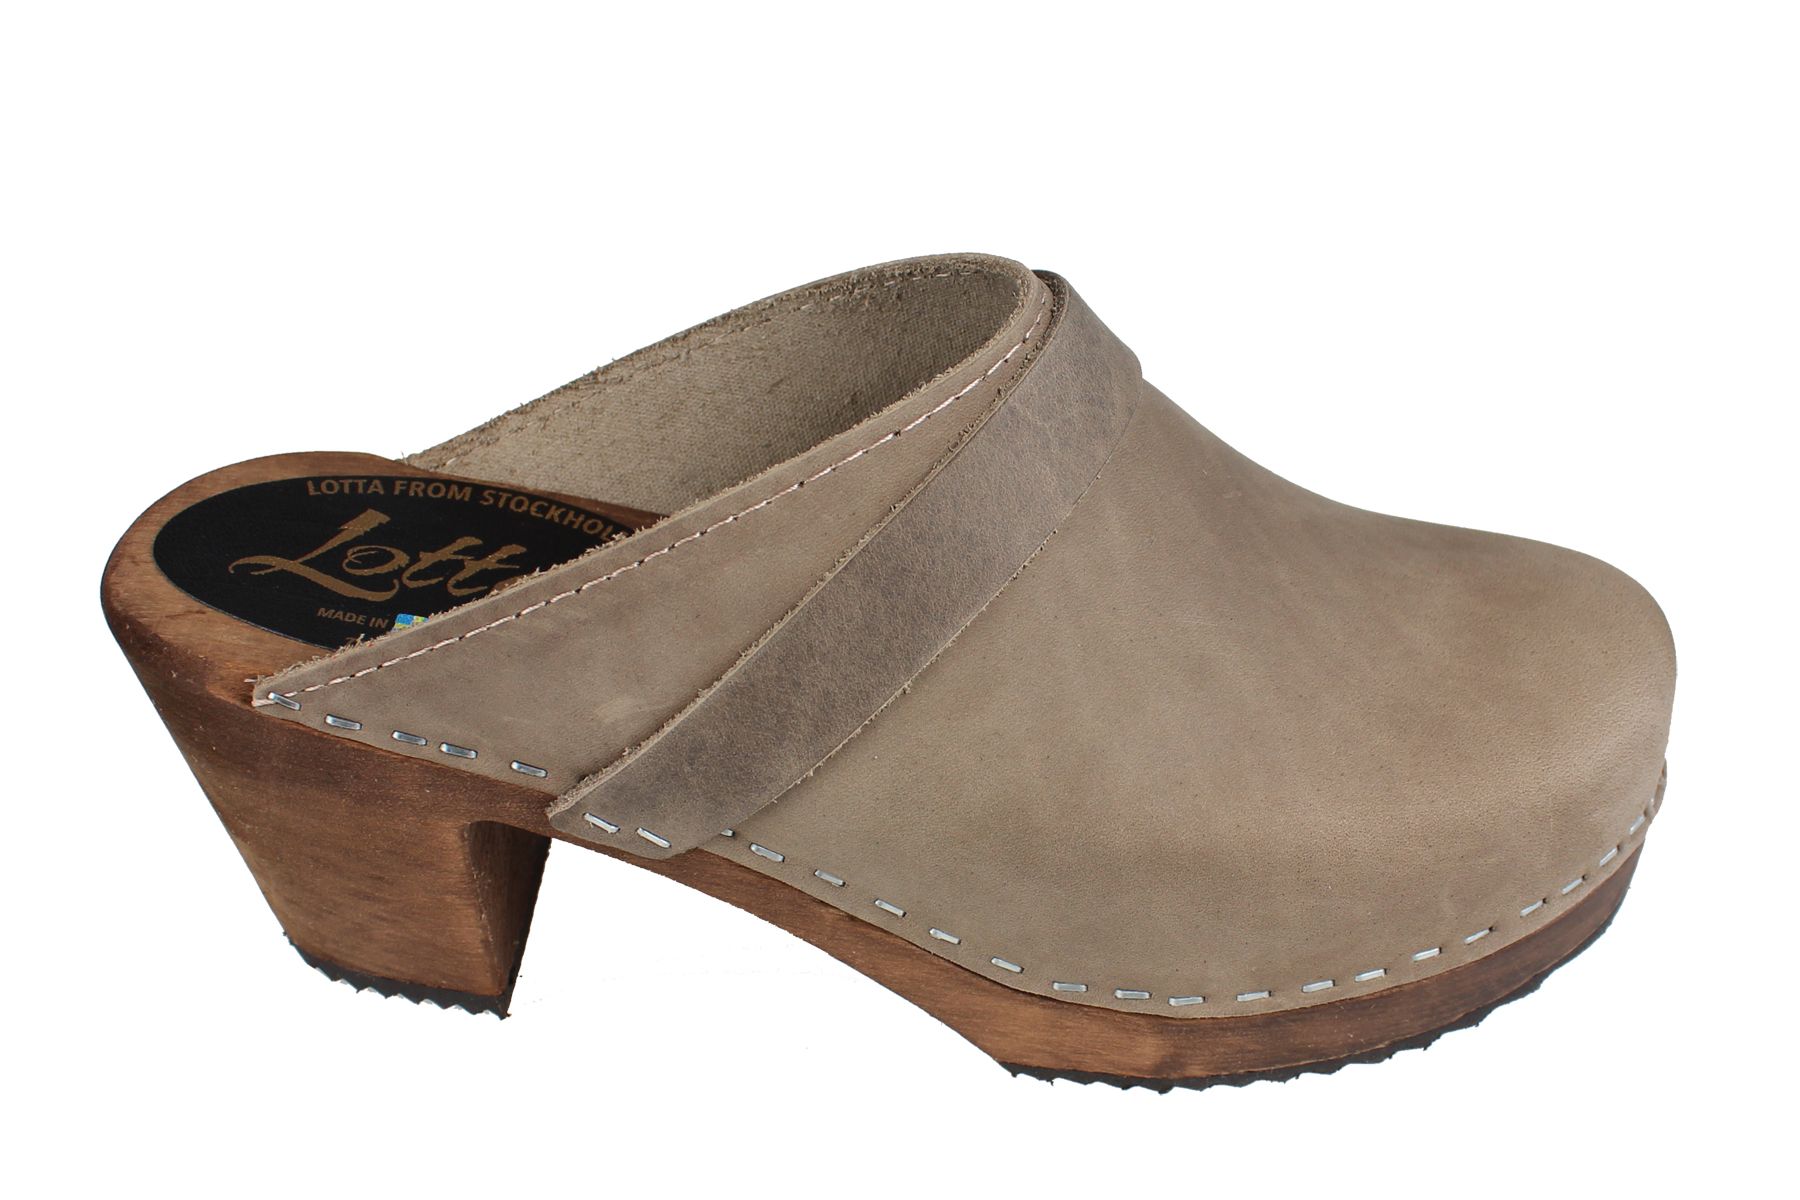 High Heel Classic Clog in Taupe Oiled Nubuck on Brown Base with Strap ...